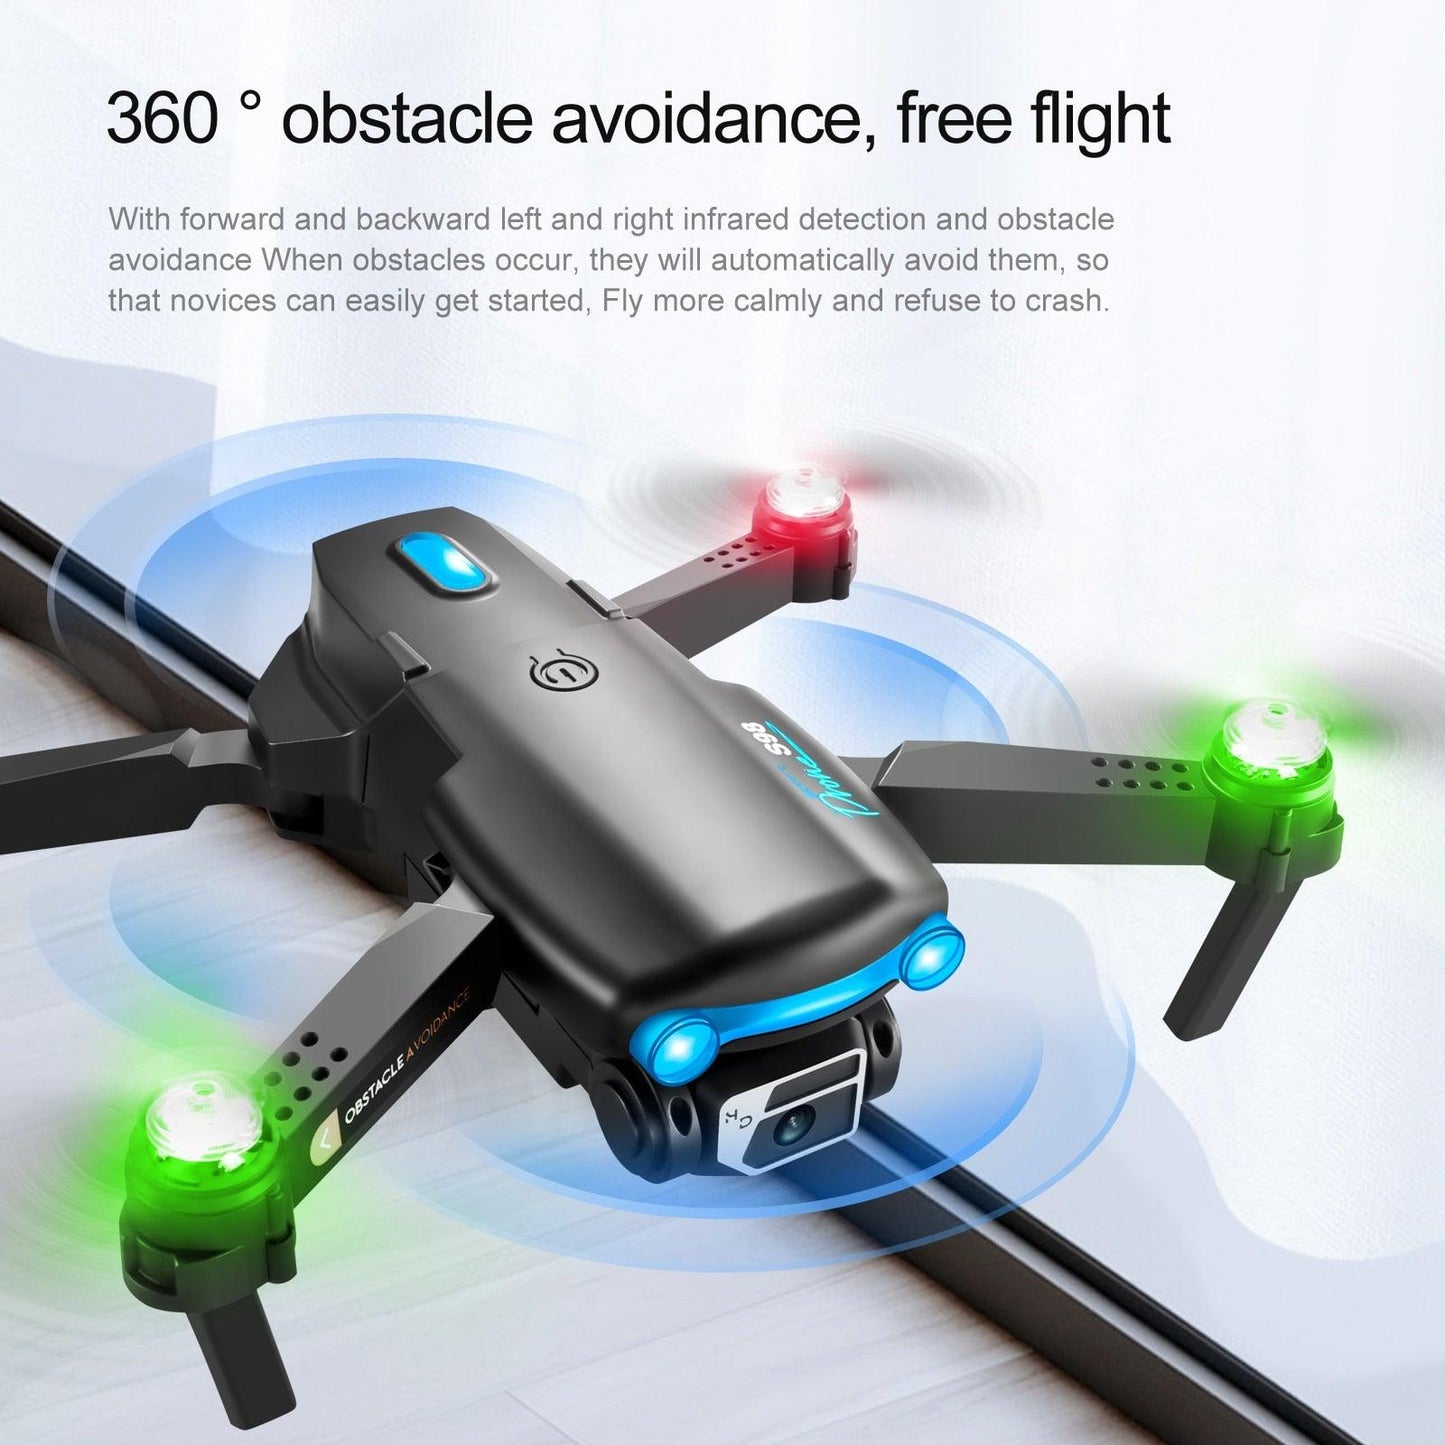 KBDFA S98 Drone - Cool Light Effect RC Helicopter Four-Sided Obstacle Avoidance UAV Optical Flow HD Camera Folding Drones Toy Gift - RCDrone